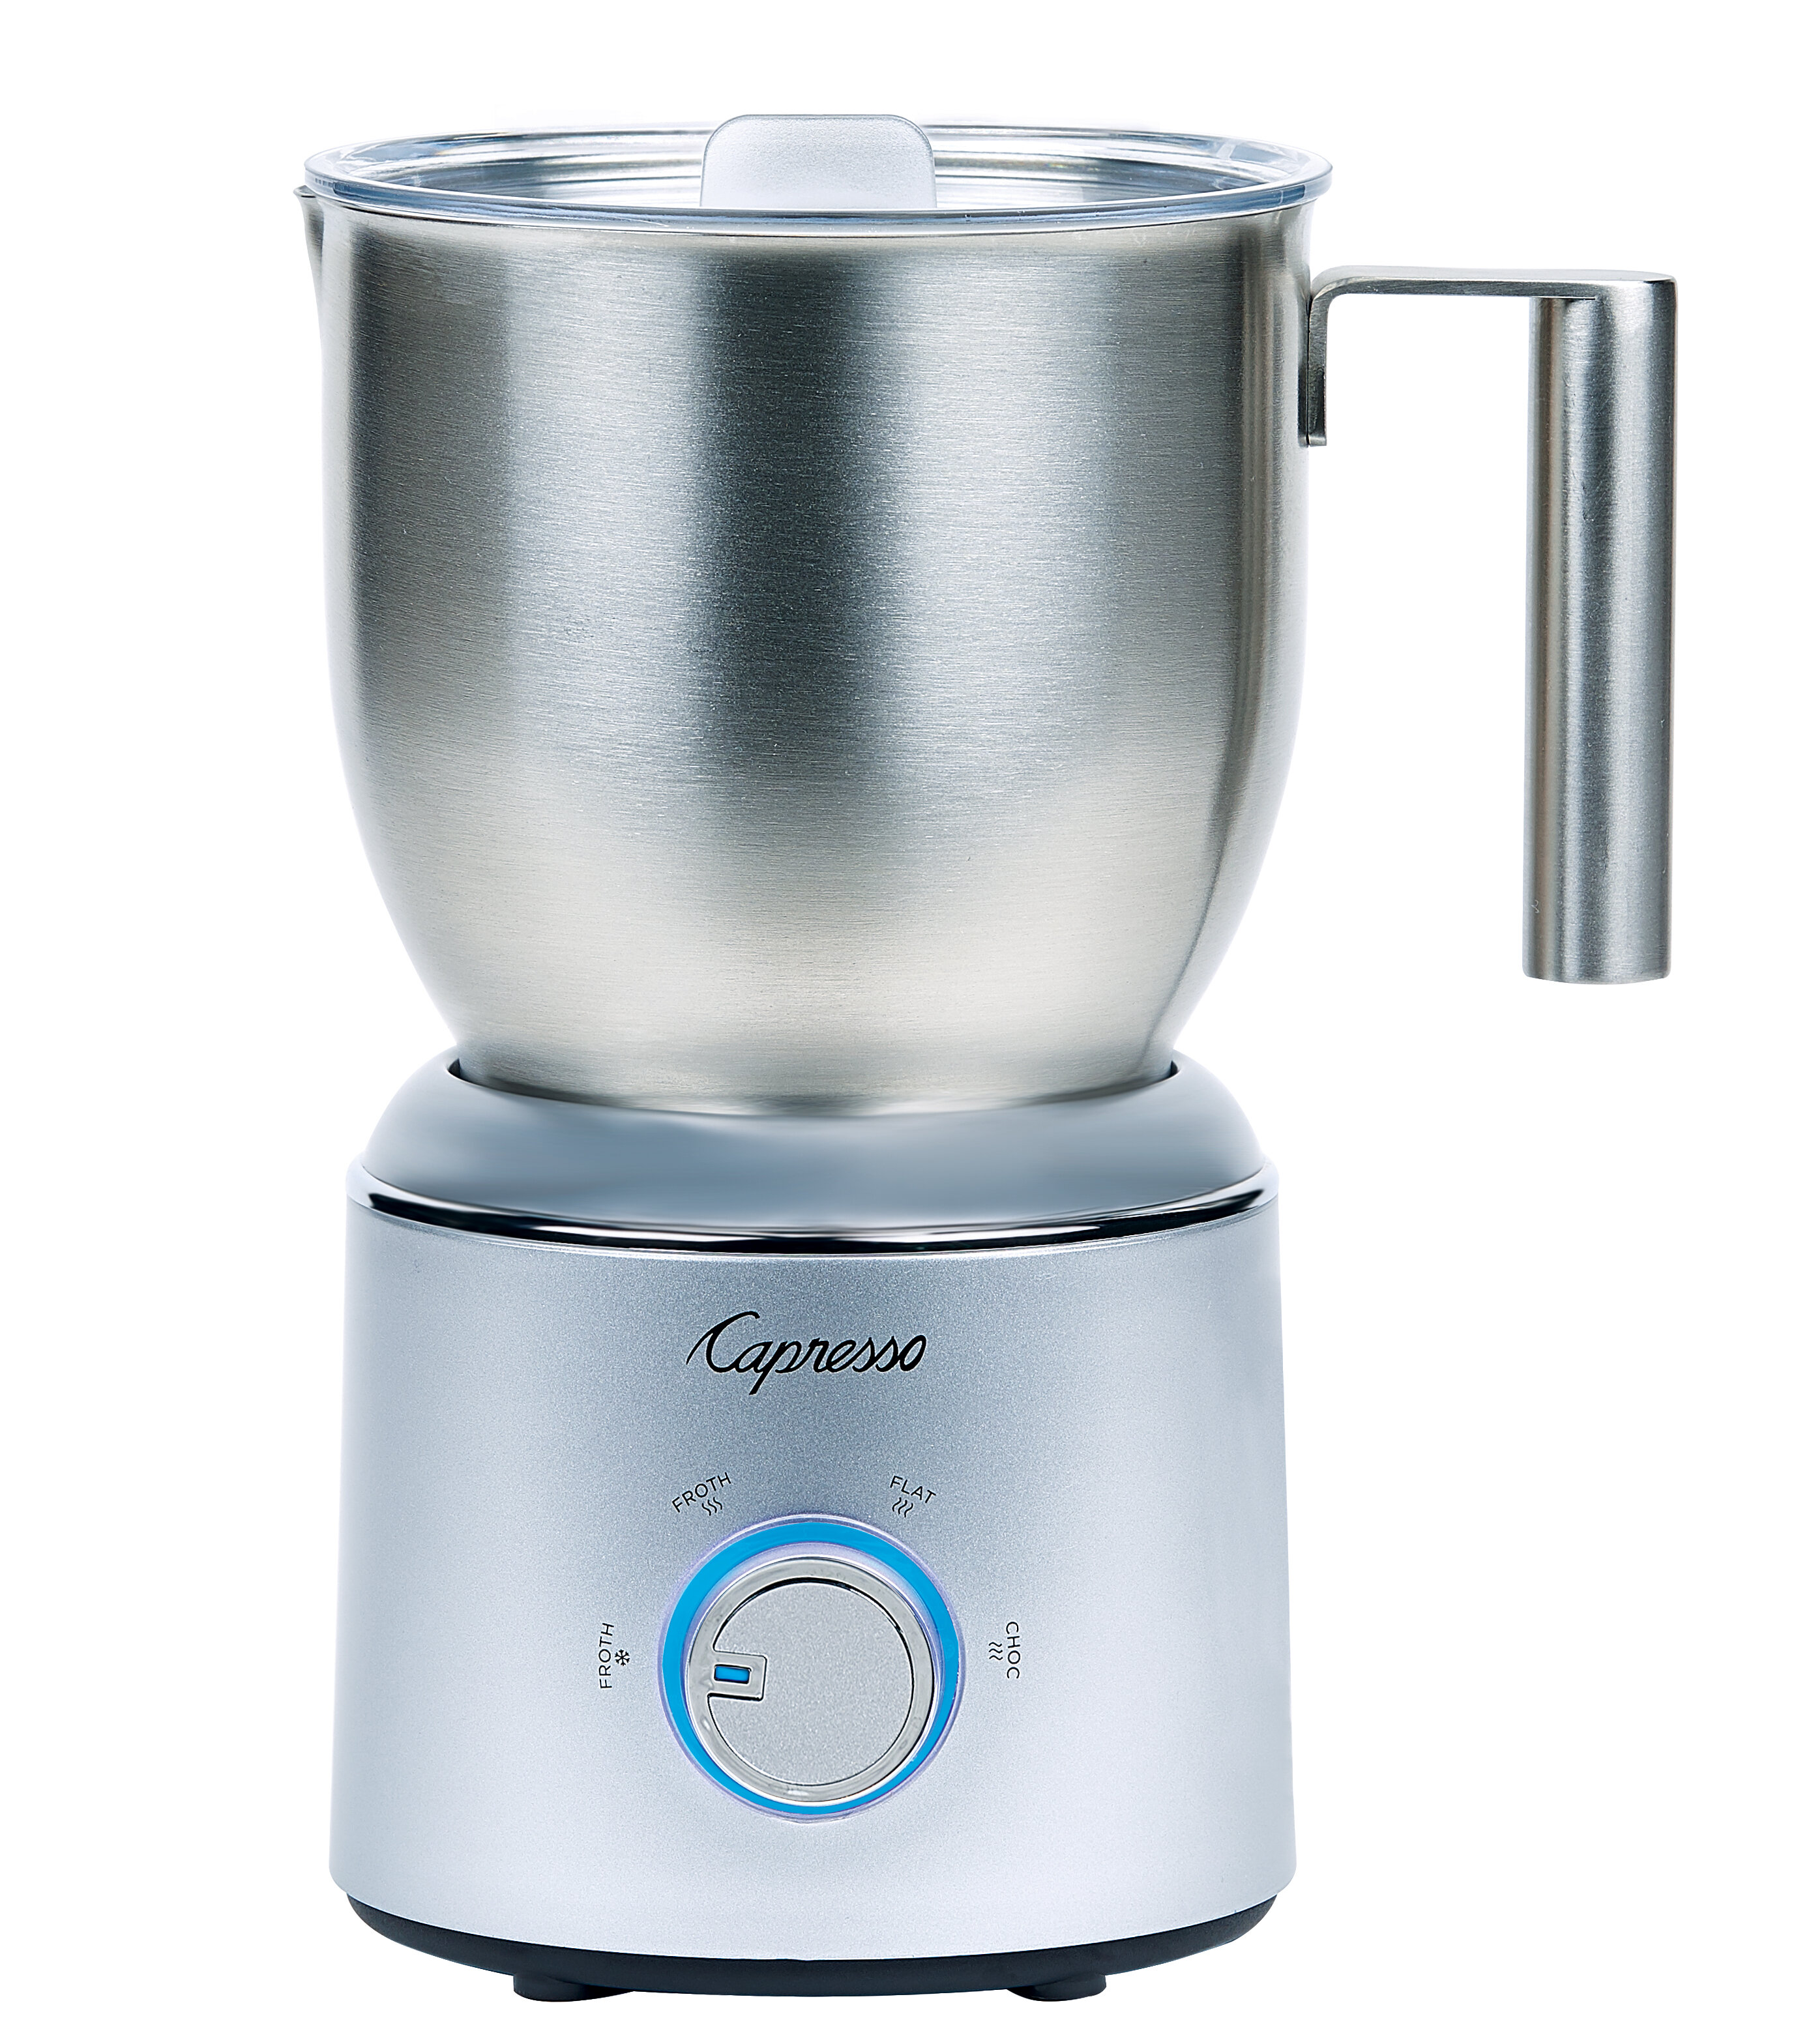 Tips for Using Capresso Milk Frothers